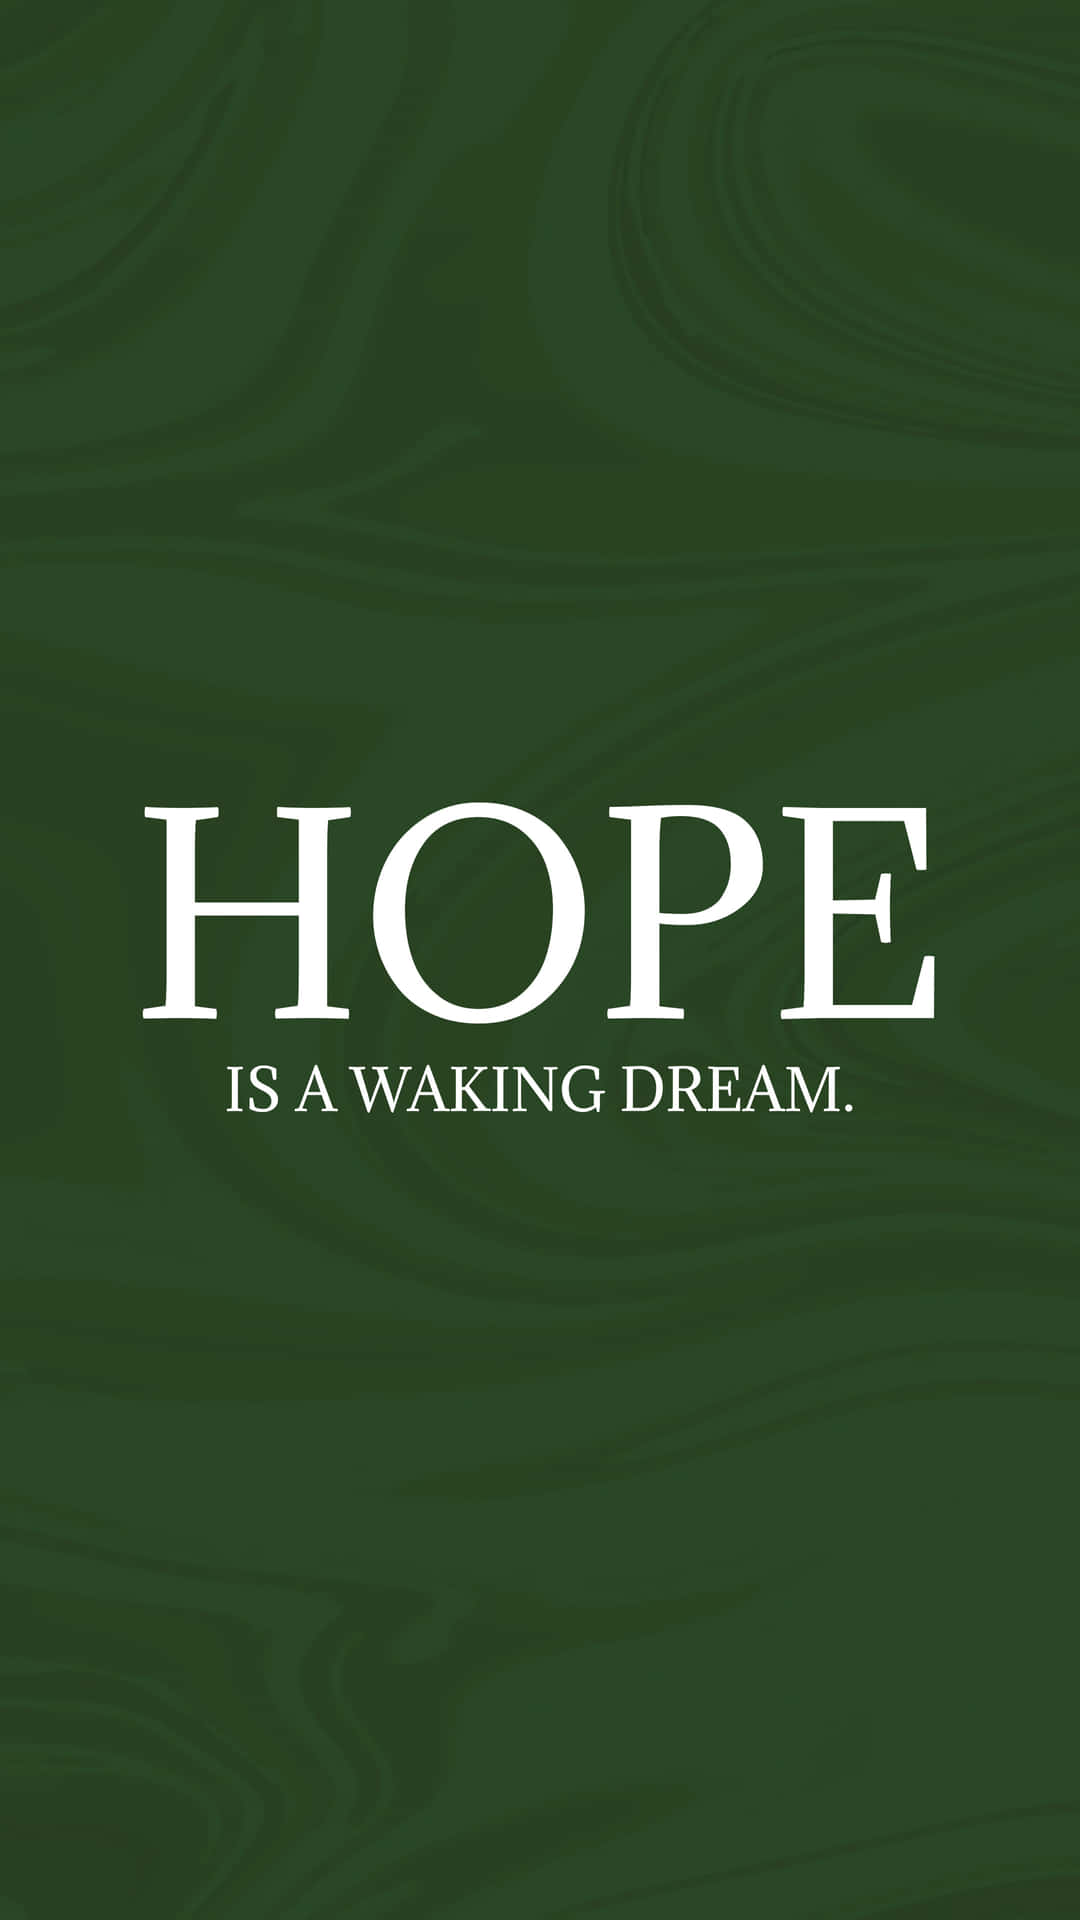 Hope Quote In Green Background Background